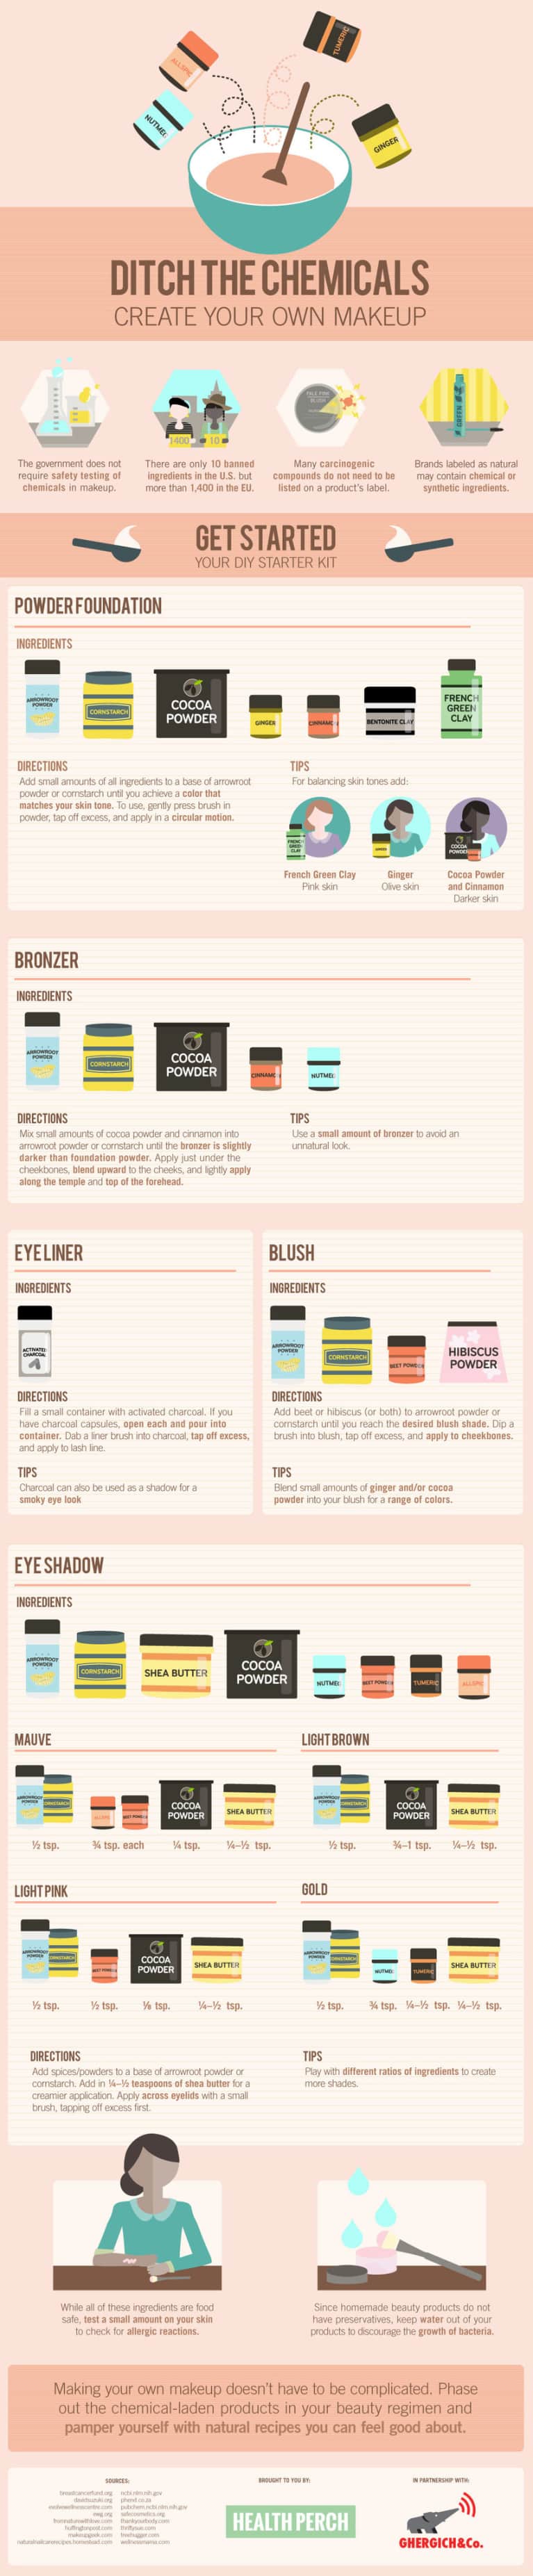 Use Your Pantry To Create Your Own Makeup (Infographic)